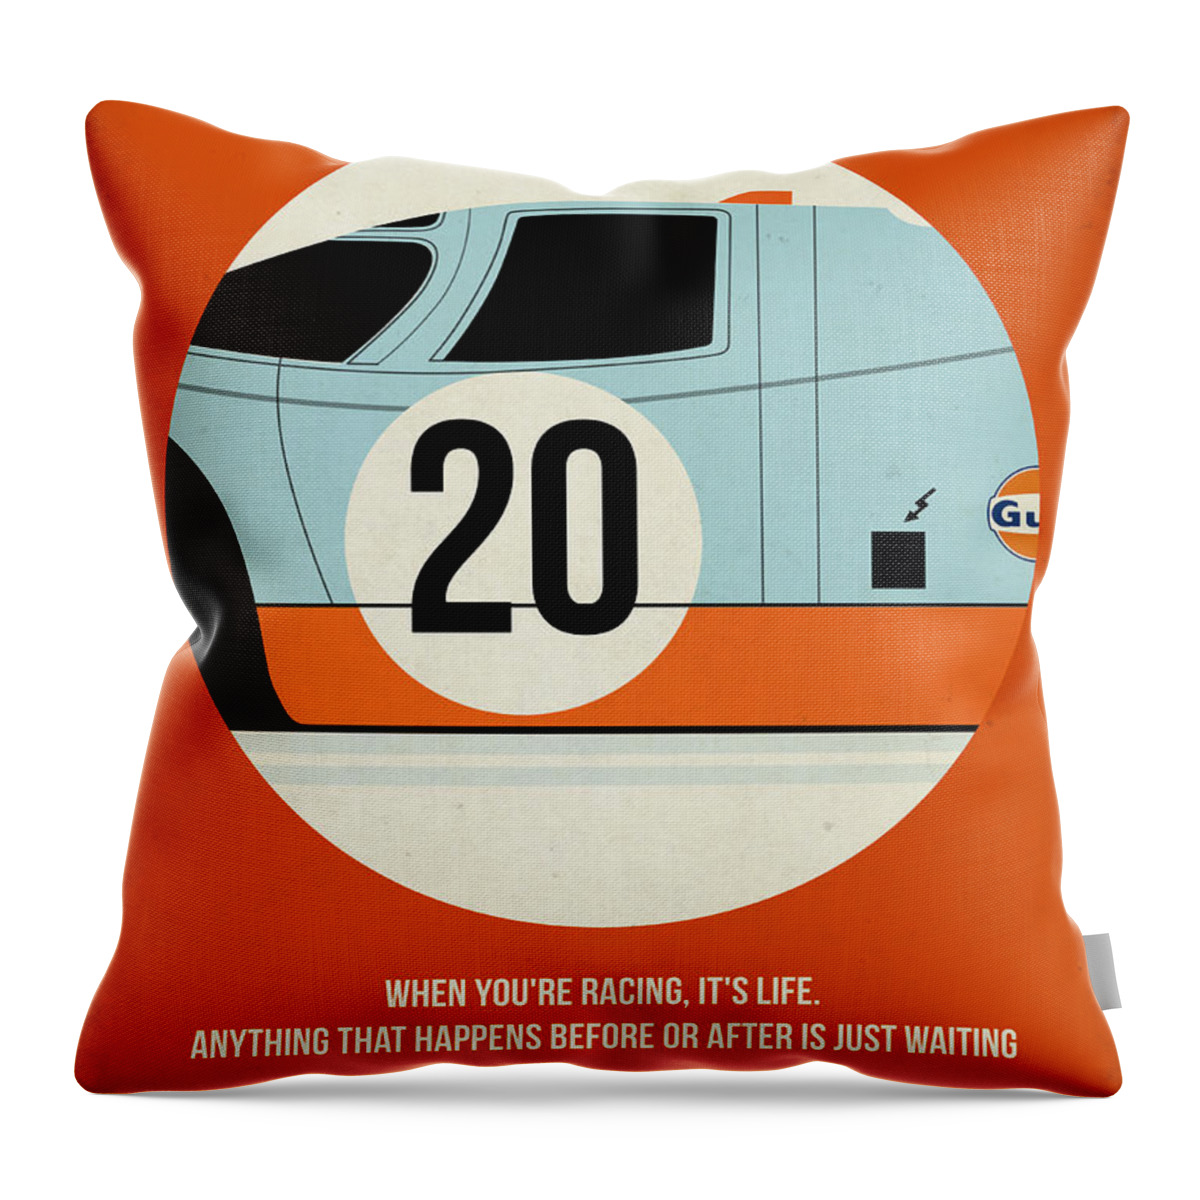 Le Mans Throw Pillow featuring the painting Le Mans Poster by Naxart Studio